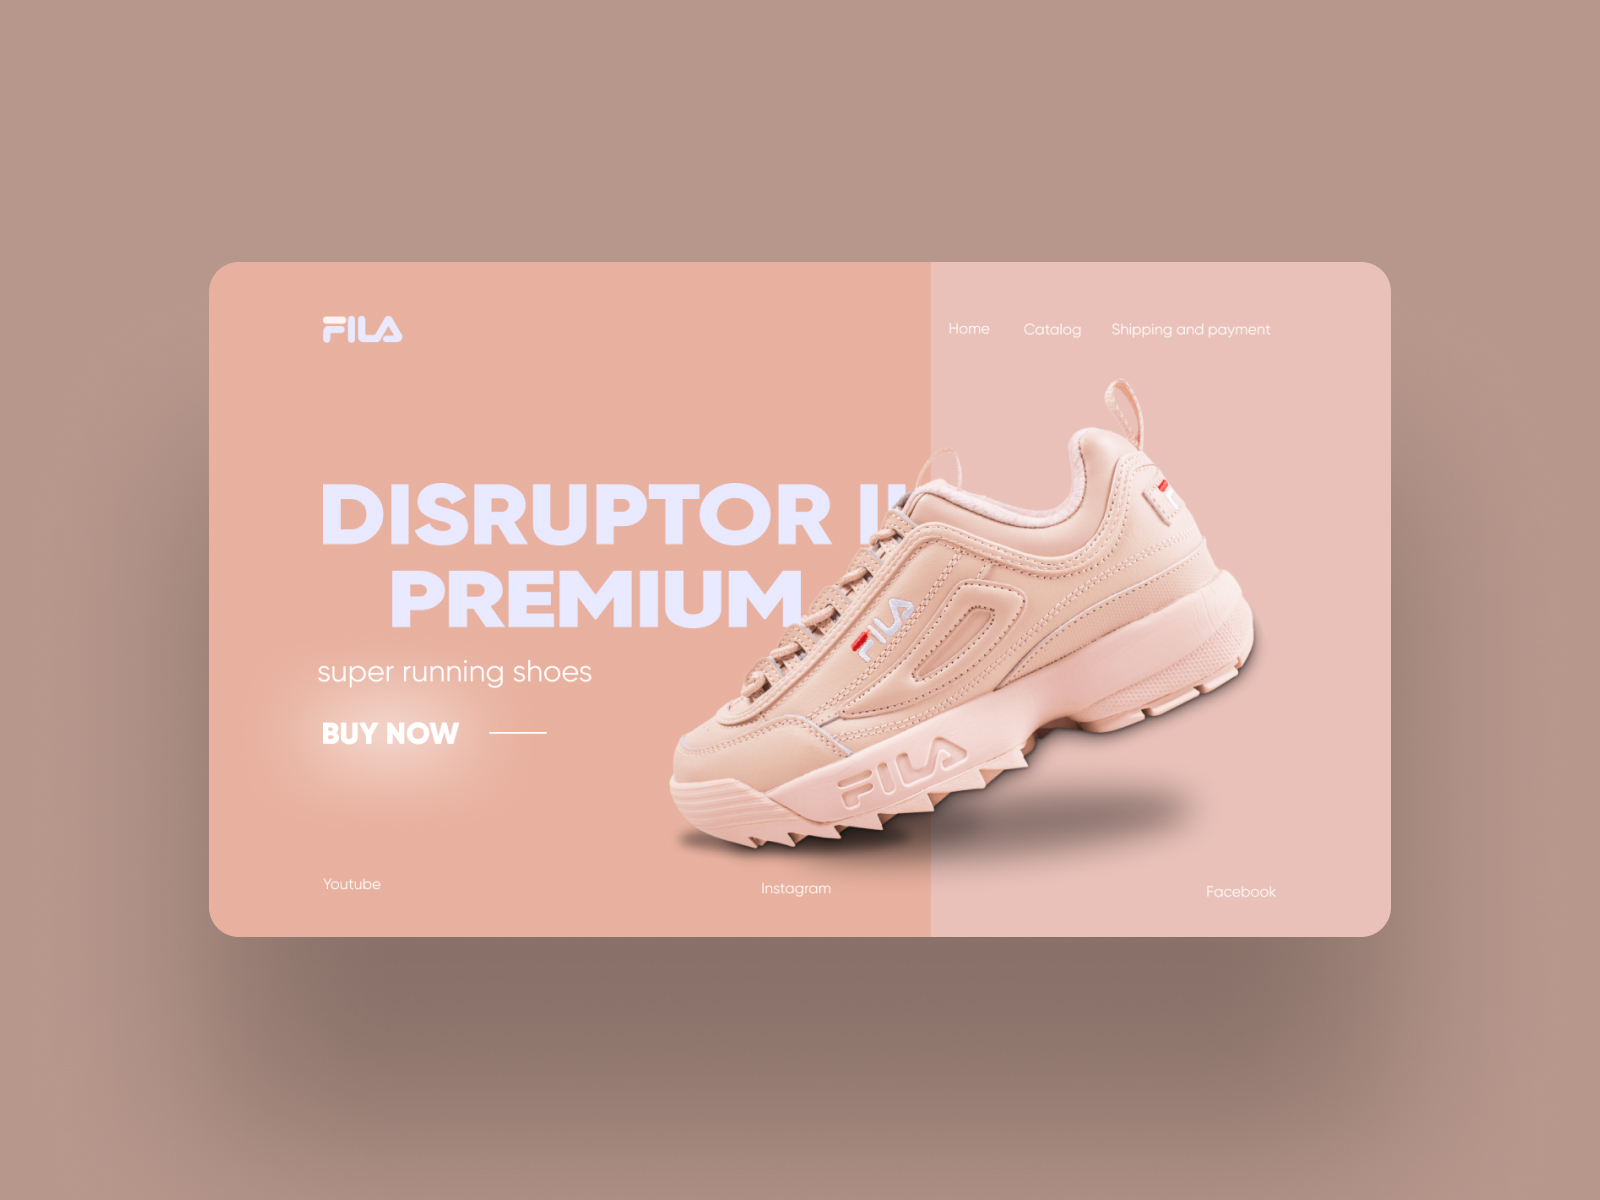 Fila home page concept by Pavel Okunev on Dribbble